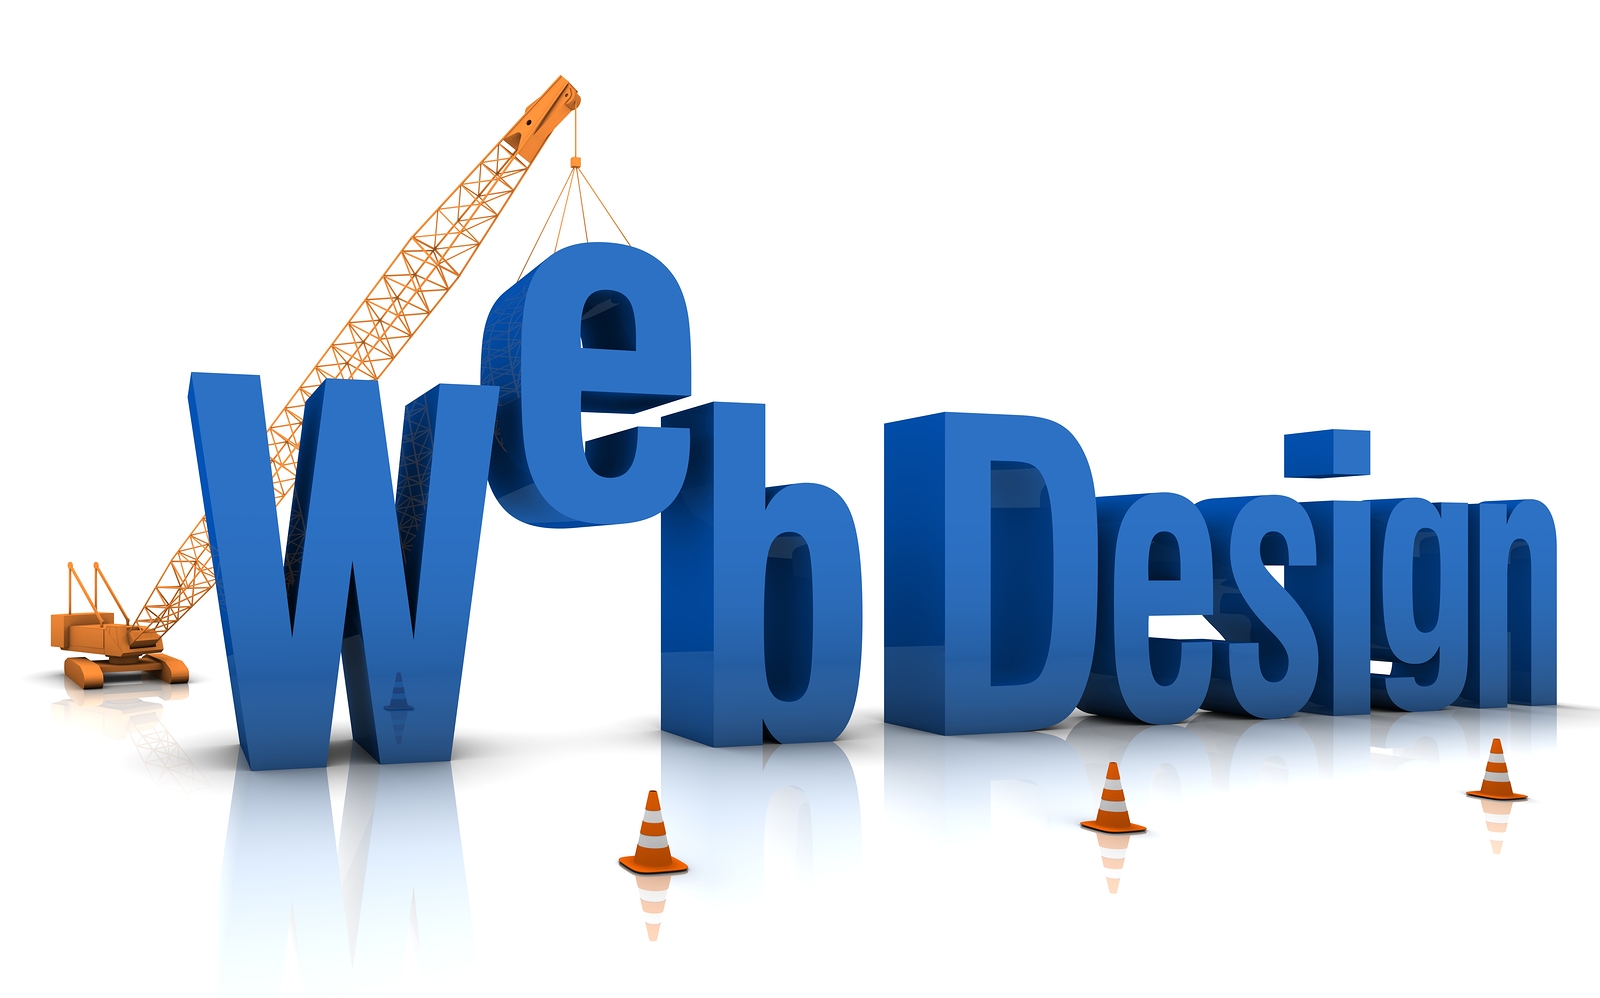 Website Redesign Requires Strategy